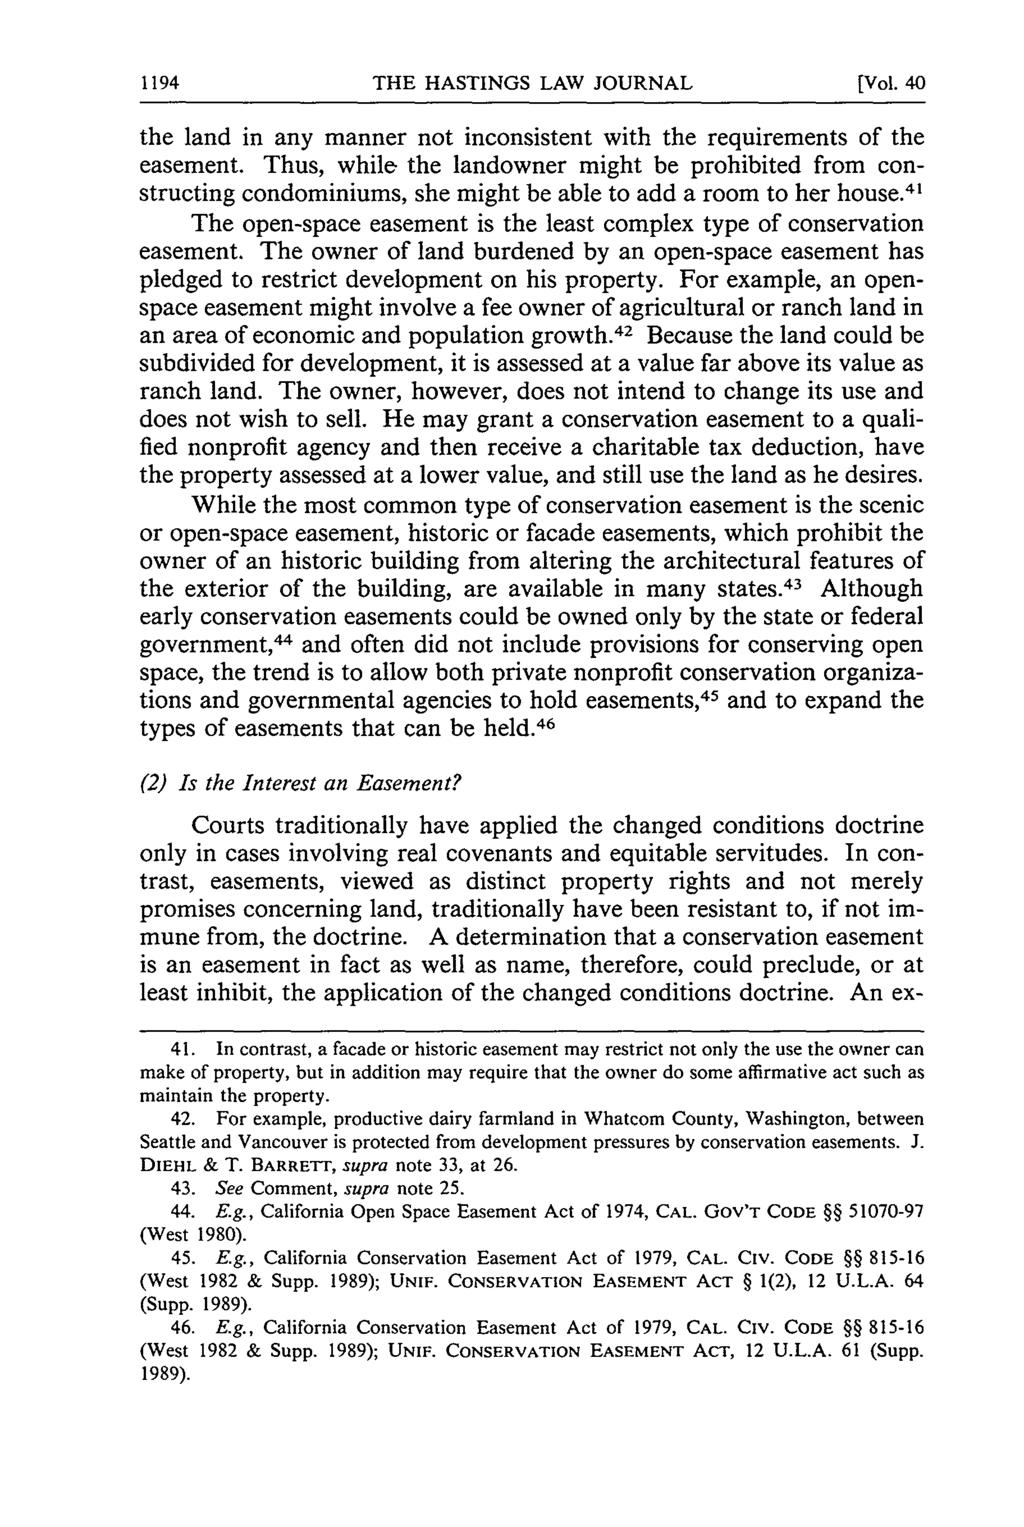 THE HASTINGS LAW JOURNAL (Vol. 40 the land in any manner not inconsistent with the requirements of the easement.